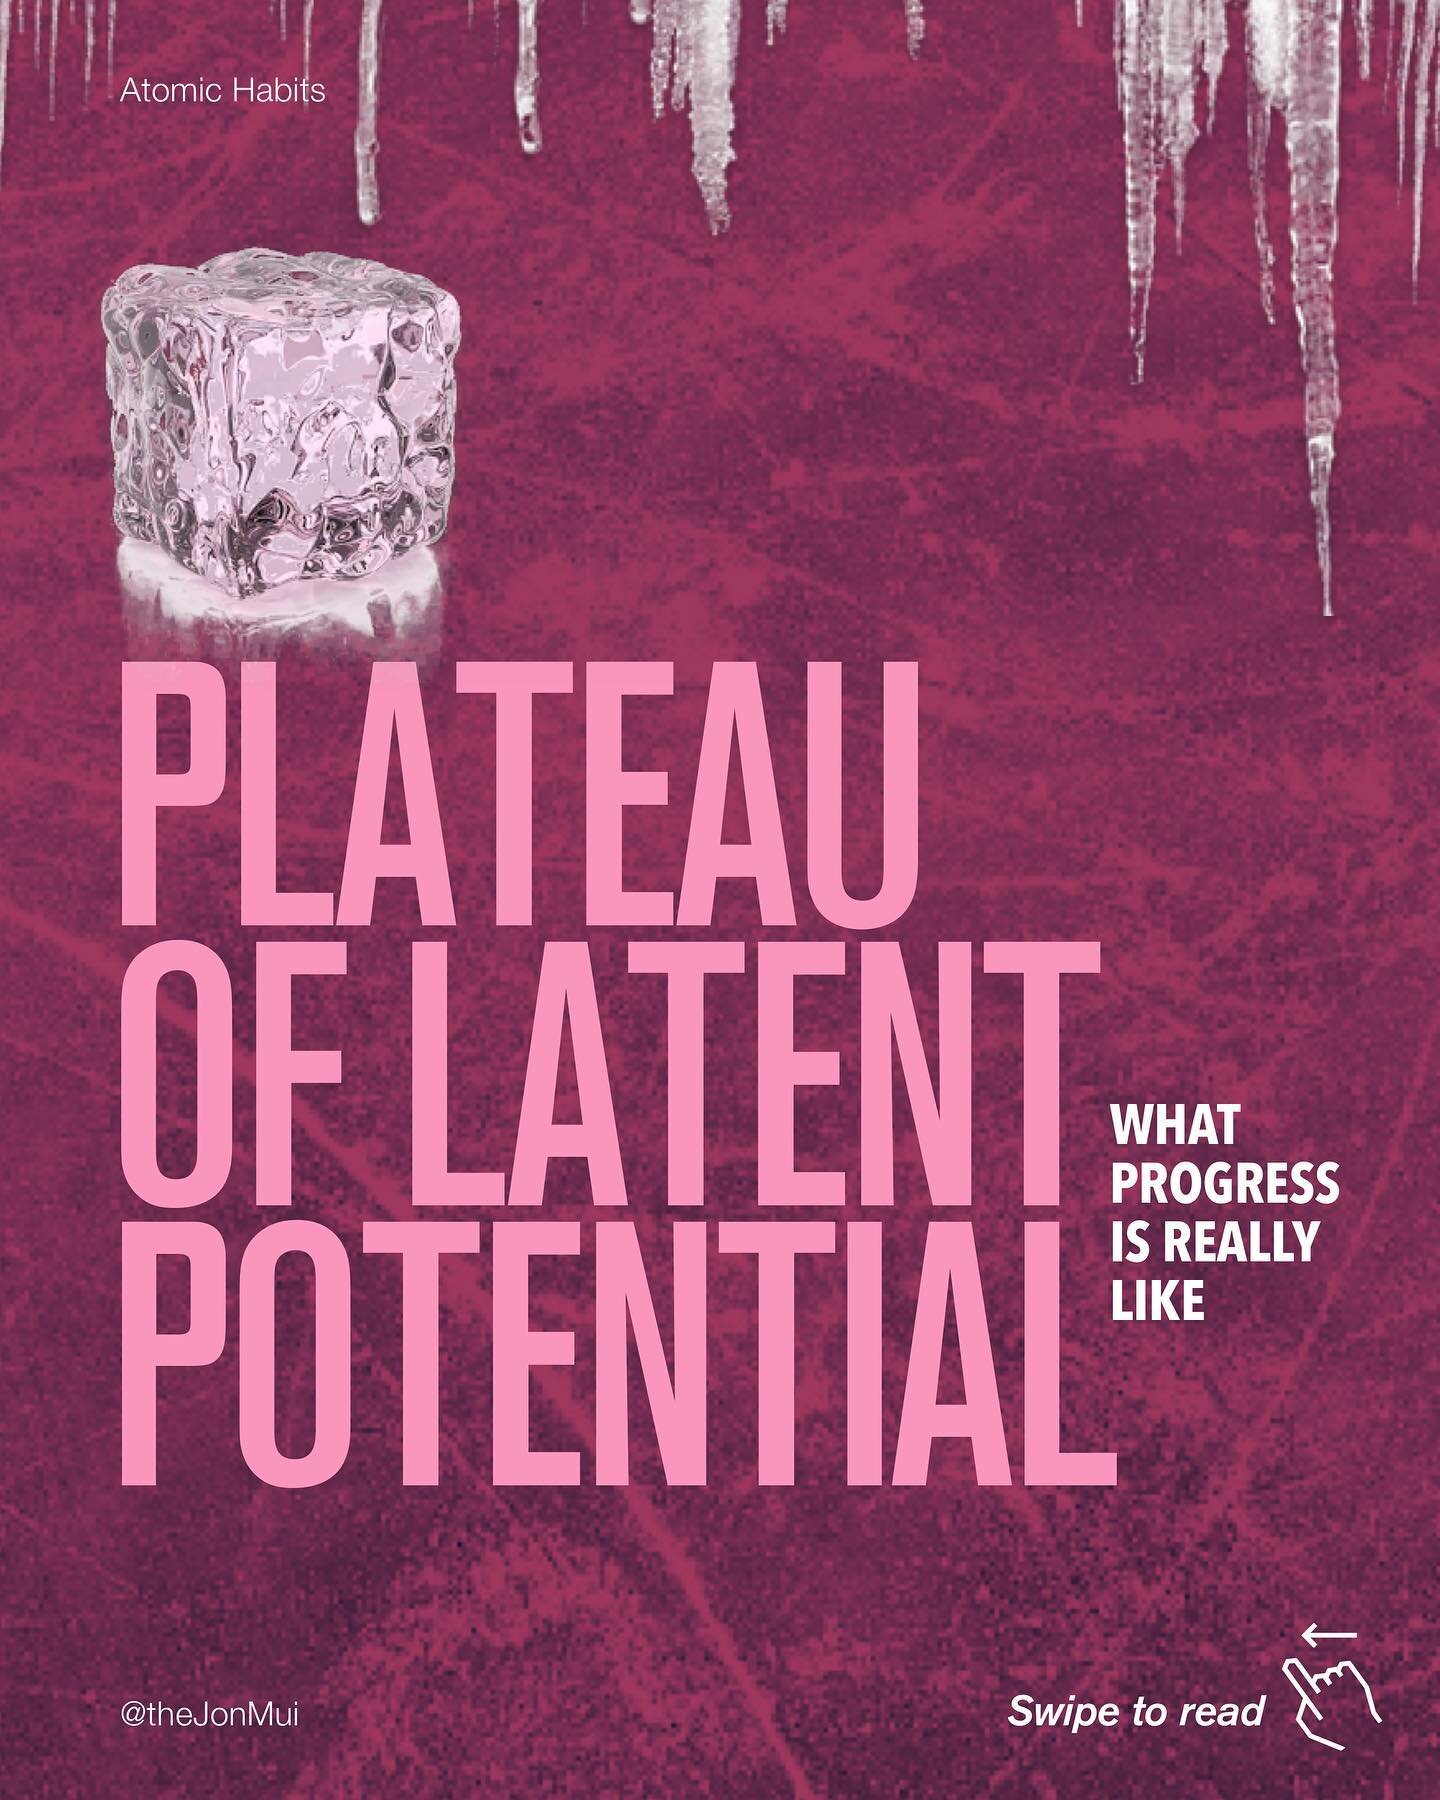 How often do we start something only to stop ⁣
⁣
when we don't see the results coming in fast enough?⁣
⁣
The Plateau of Latent Potential is all about persistence.⁣
⁣
This is simply a reminder for what we already know.⁣
⁣
To get the results we're look